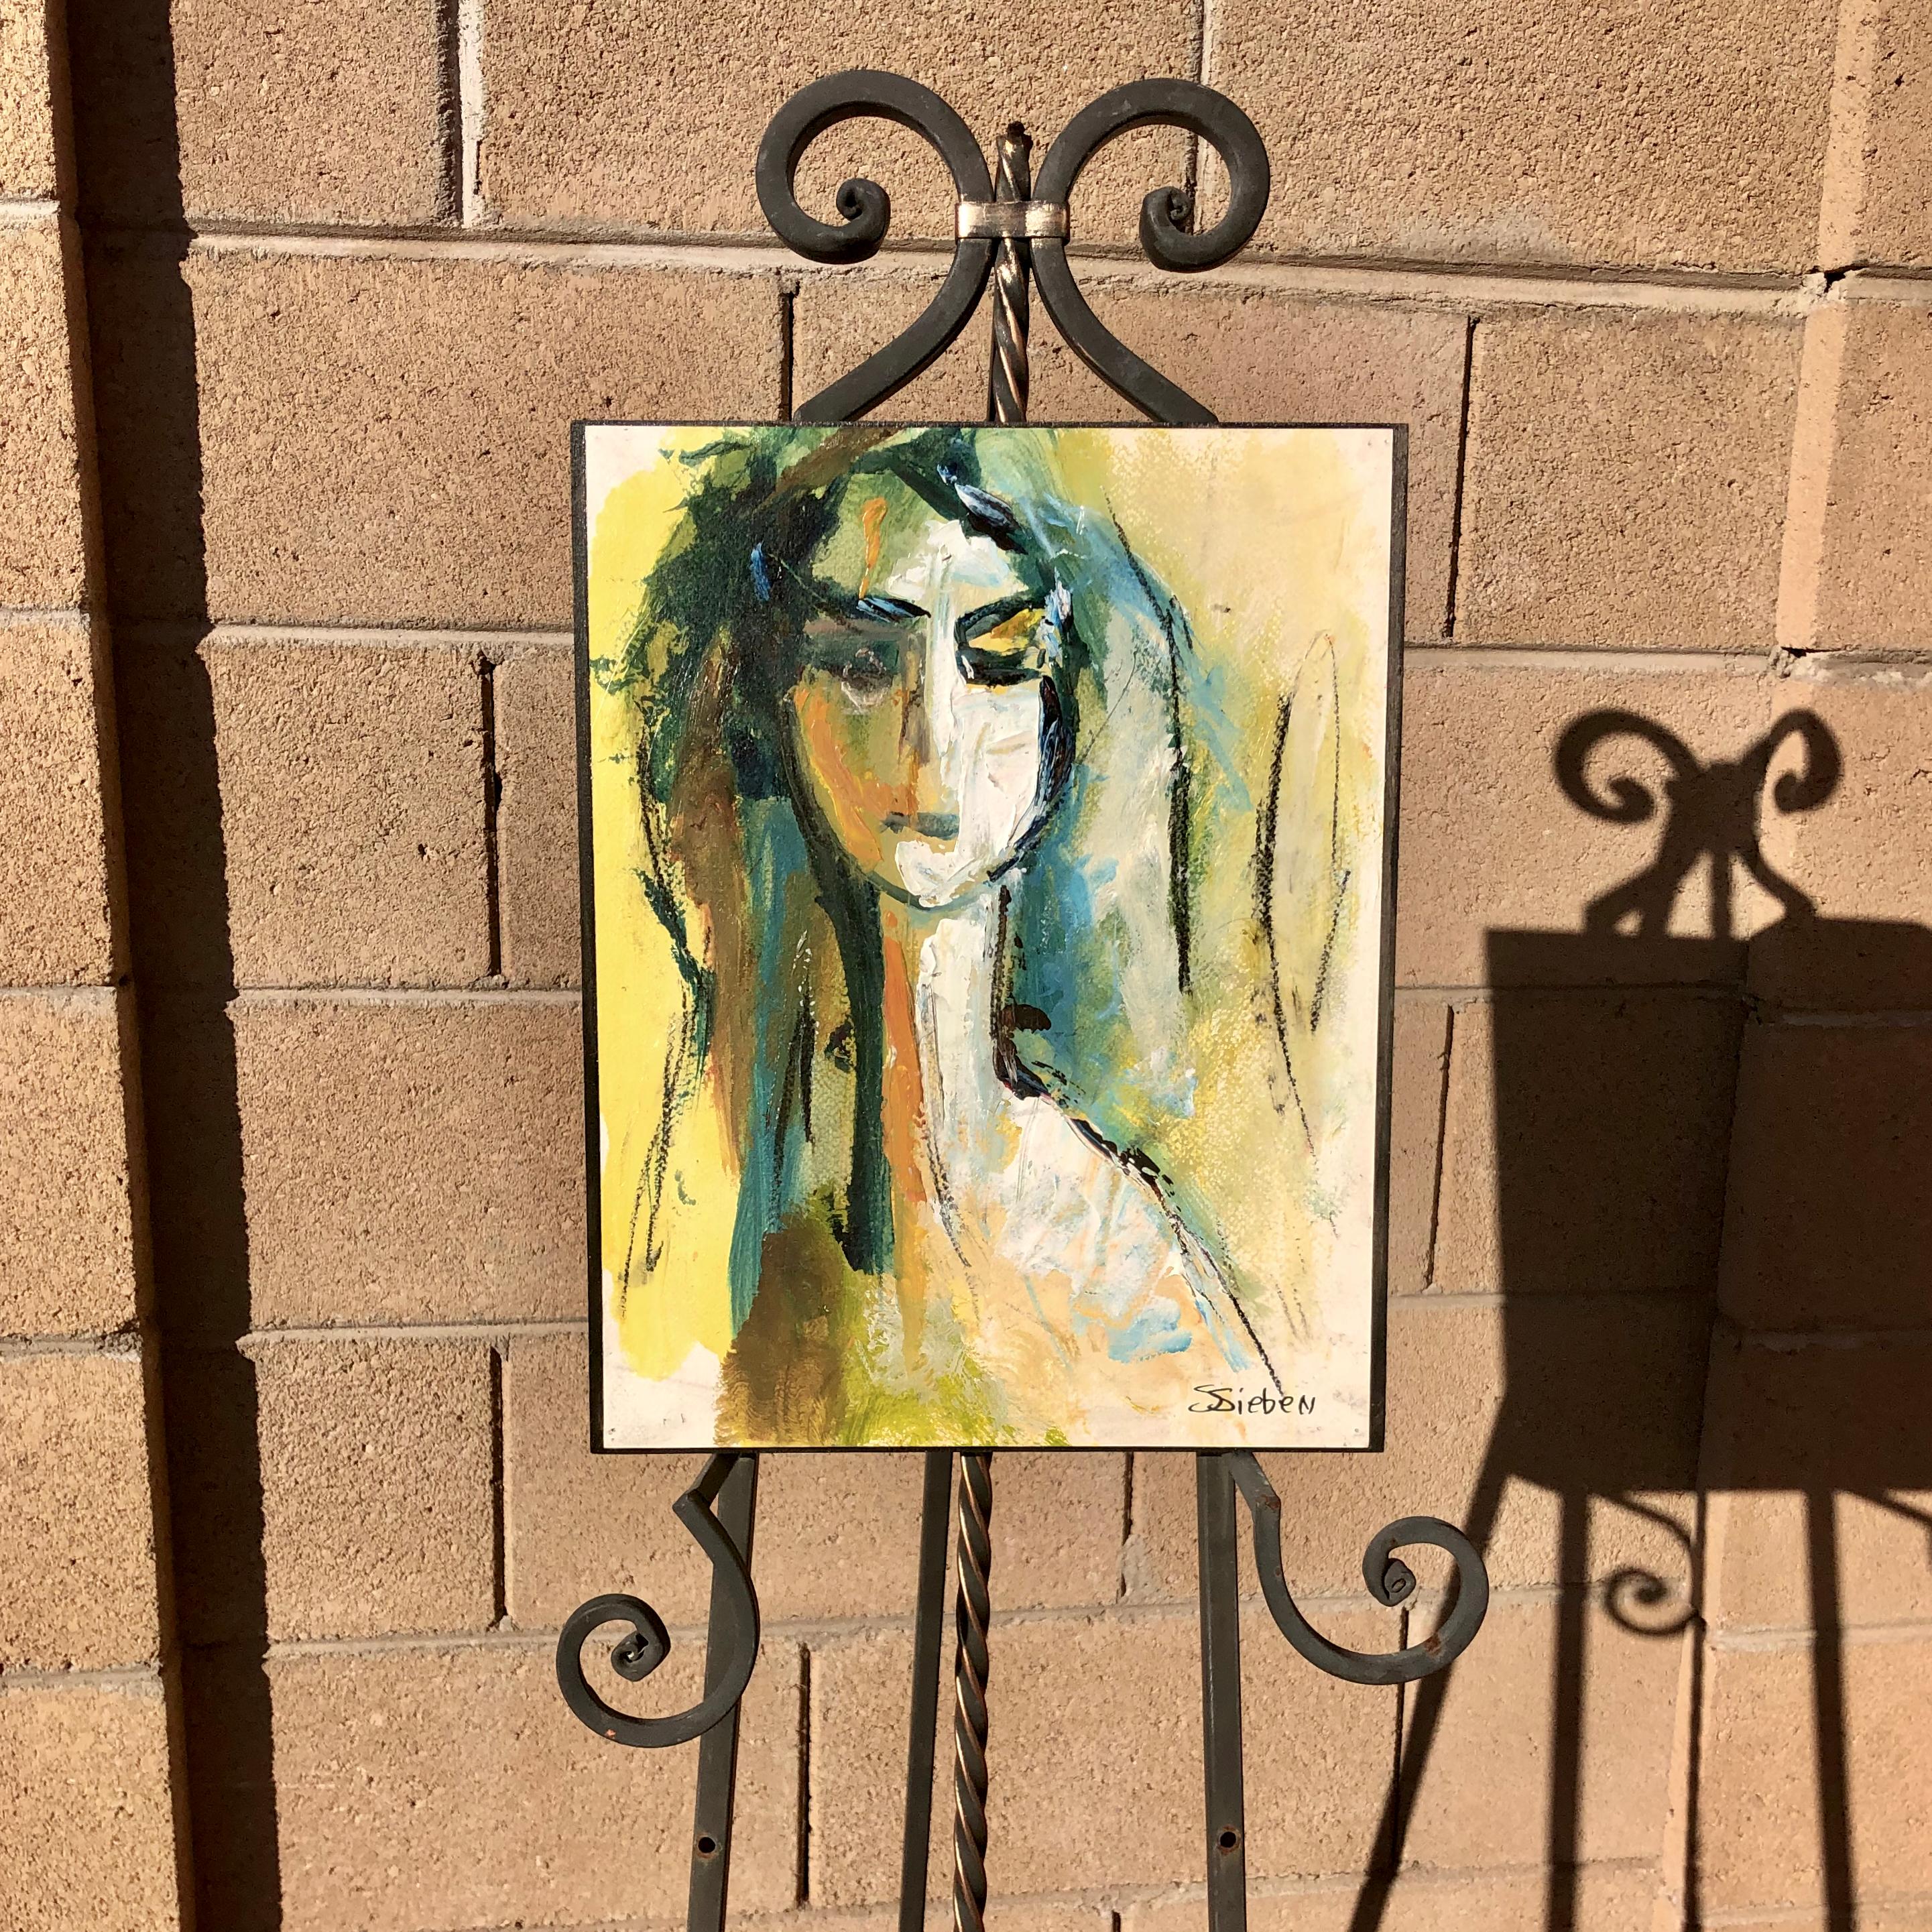 <p>Artist Comments<br>This painting portrays a woman with an ambiguous expression, adding a mysterious mood to the piece. The blue streaks in her hair and the shadow on her face create a contrasting visual against the muted yellow